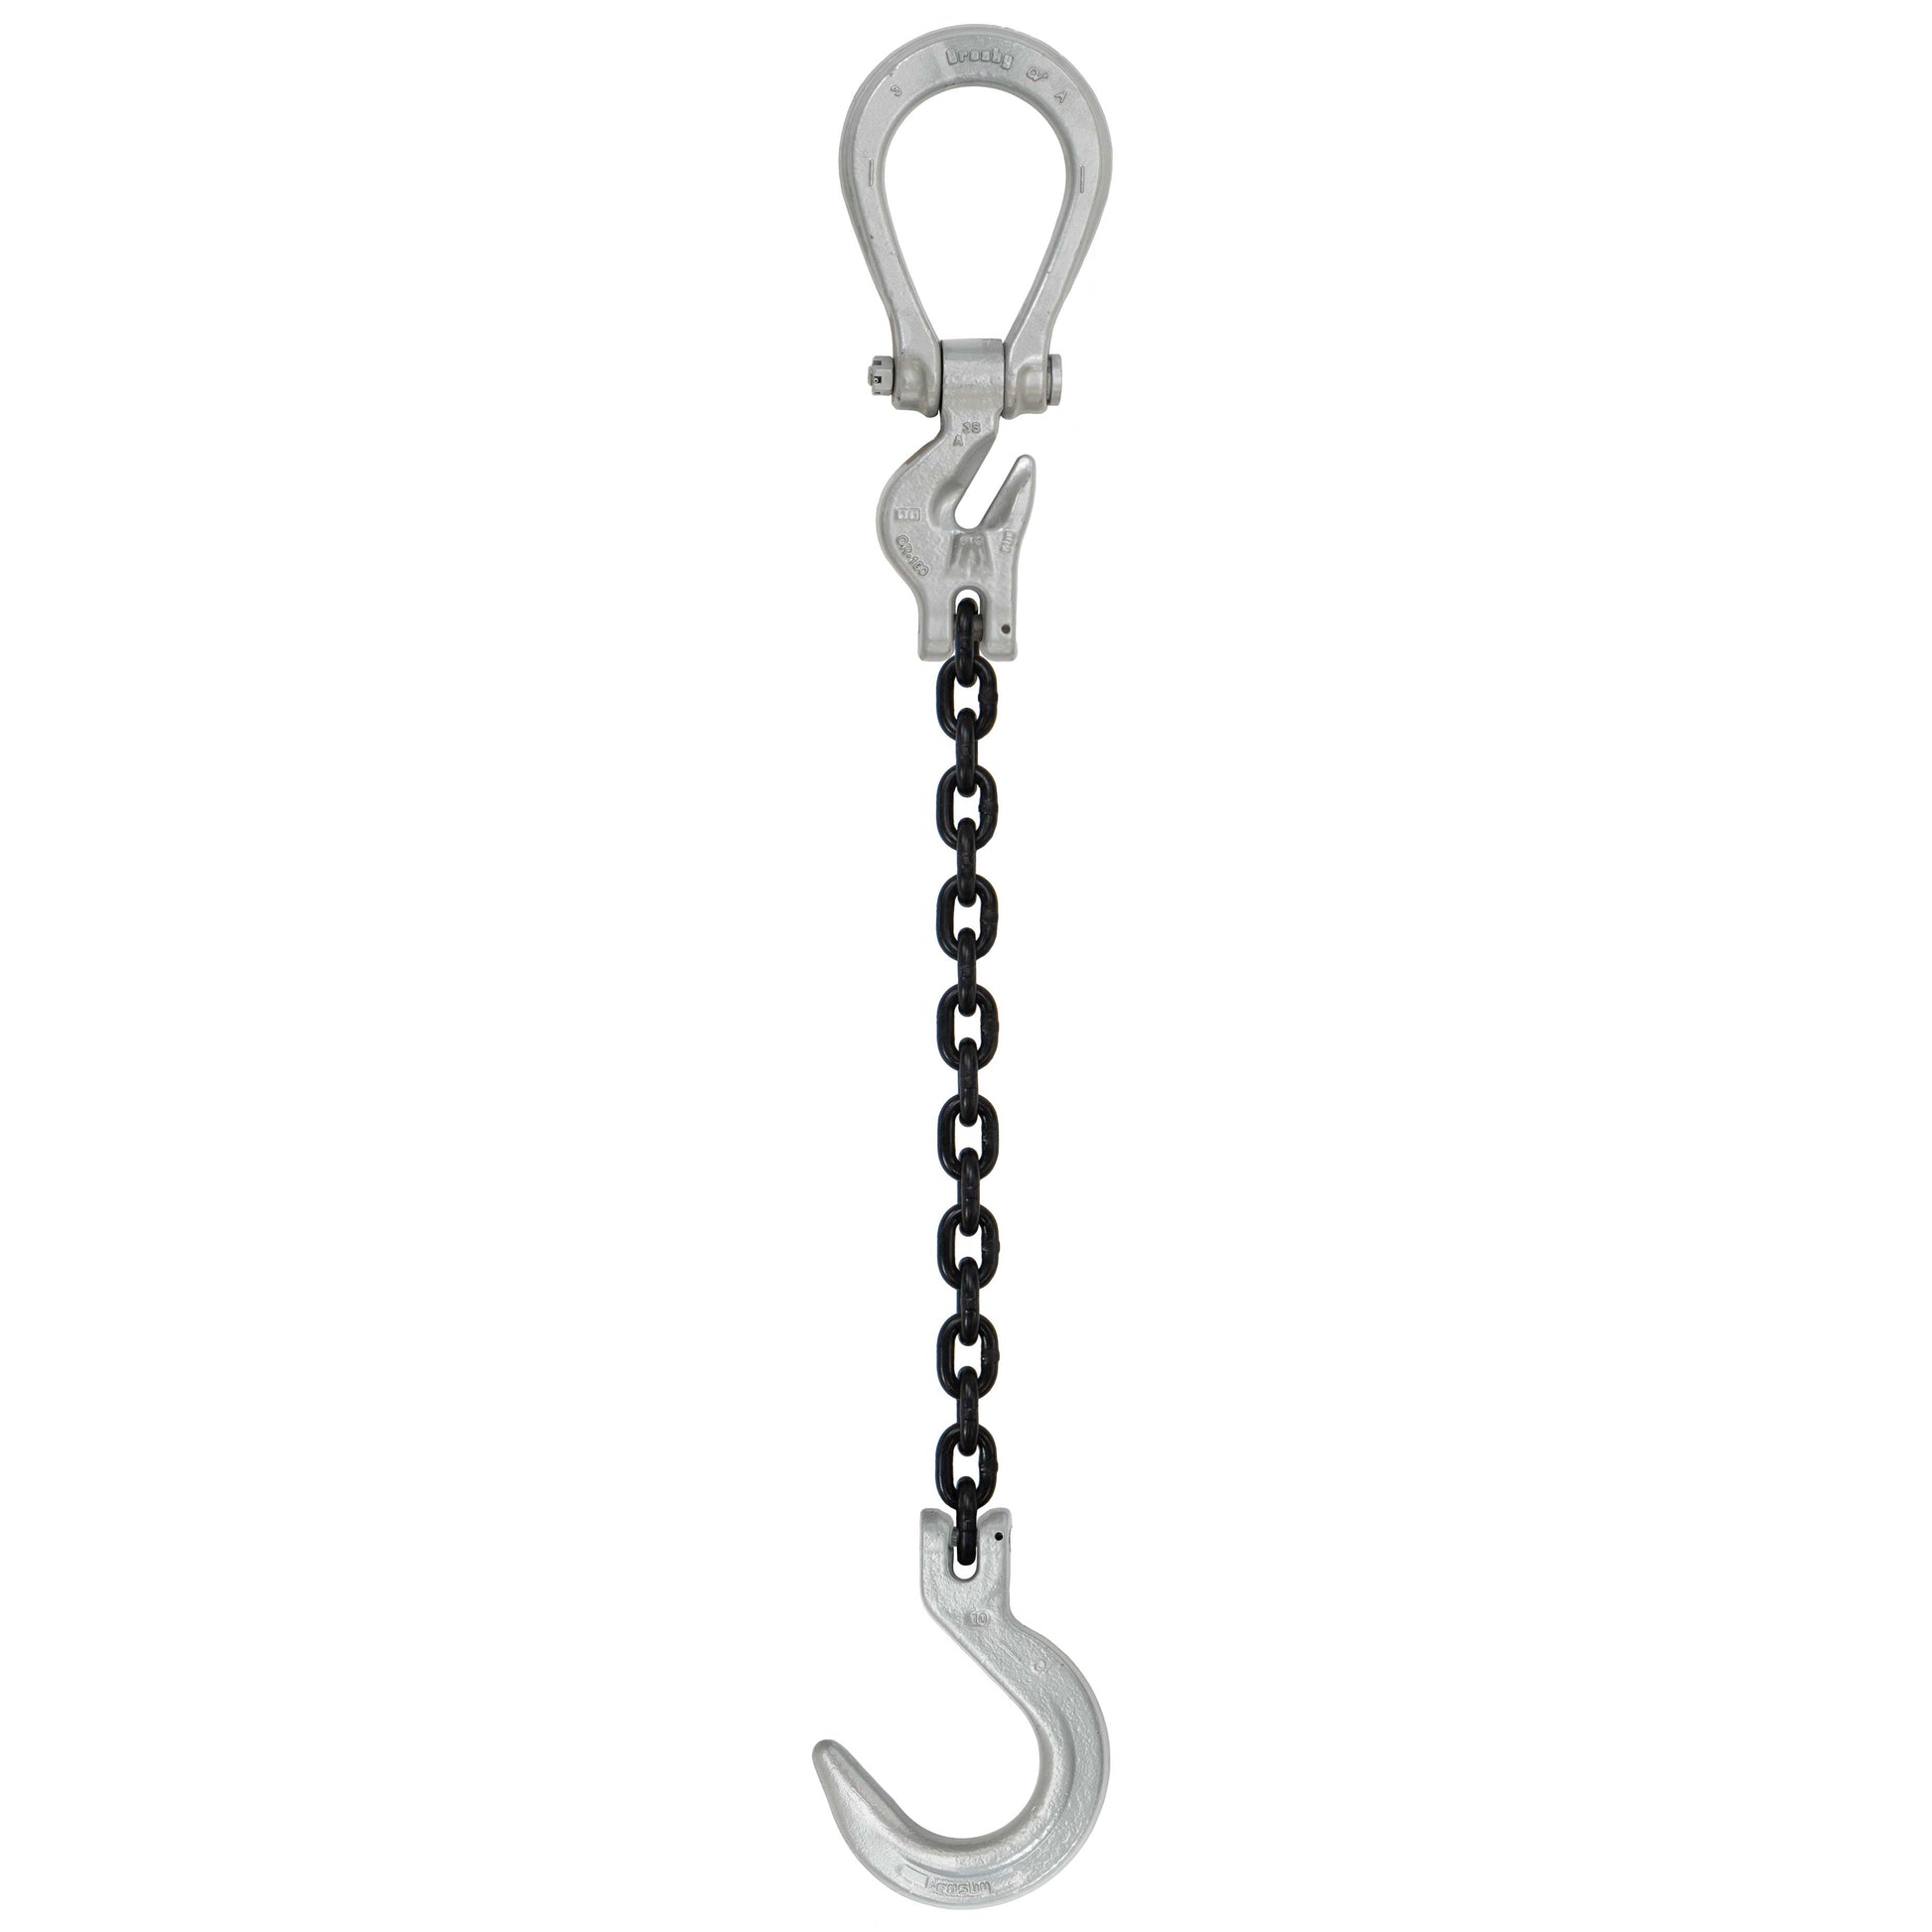 12 inch x 15 foot Domestic Adjustable Single Leg Chain Sling w Crosby Foundry Hook Grade 100 image 1 of 2